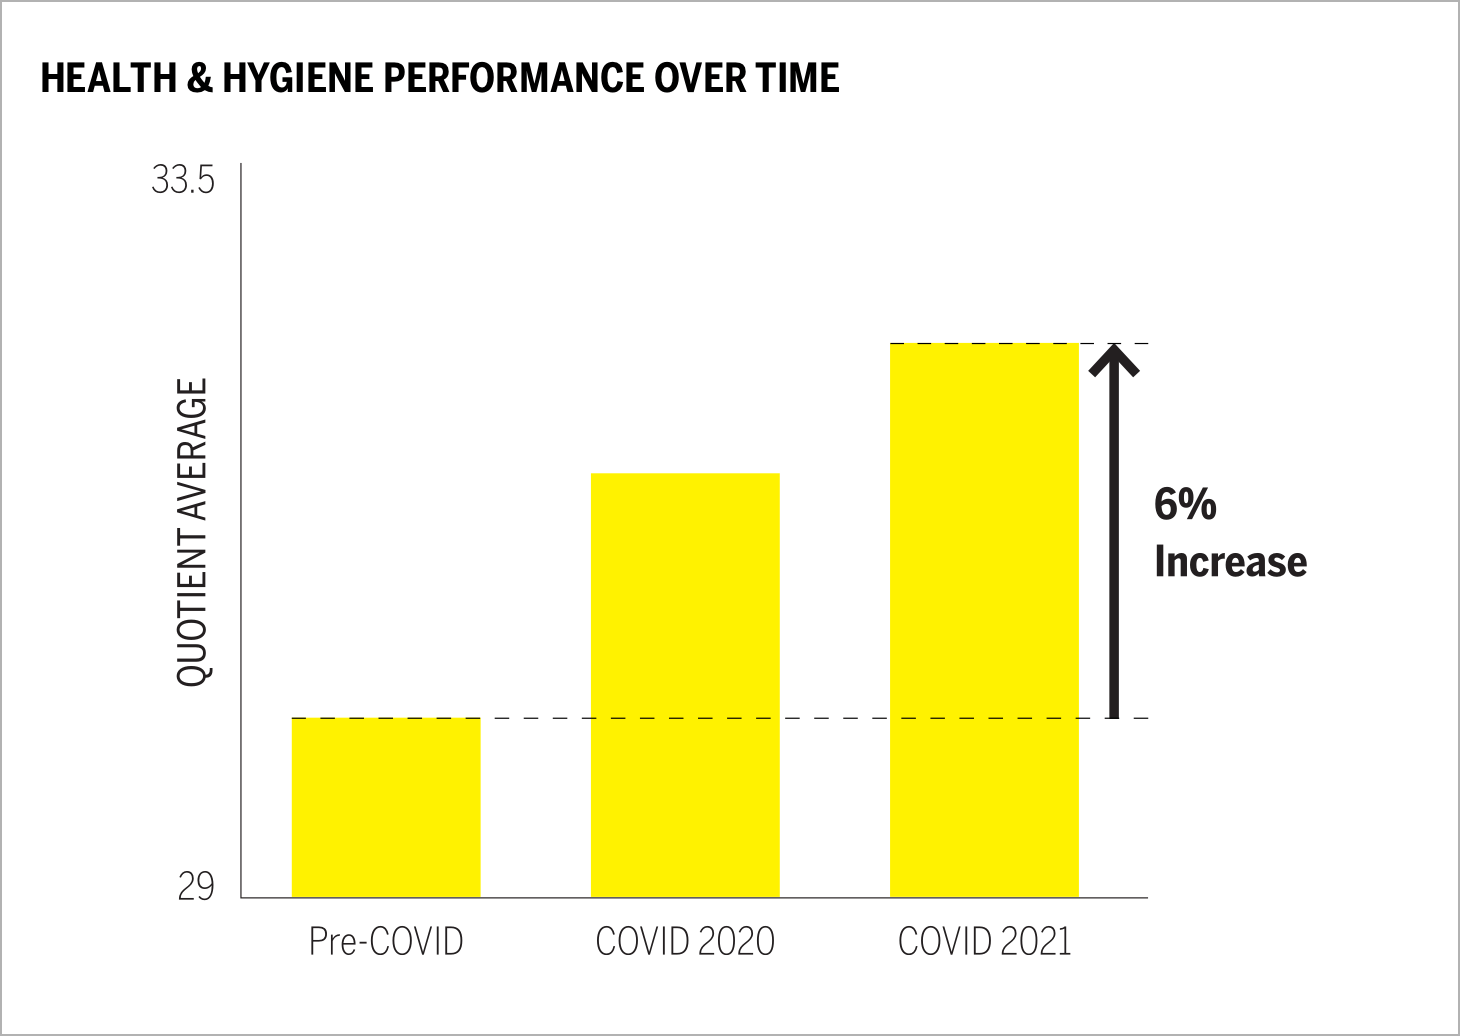 HEALTH & HYGIENE PERFORMANCE OVER TIME chart